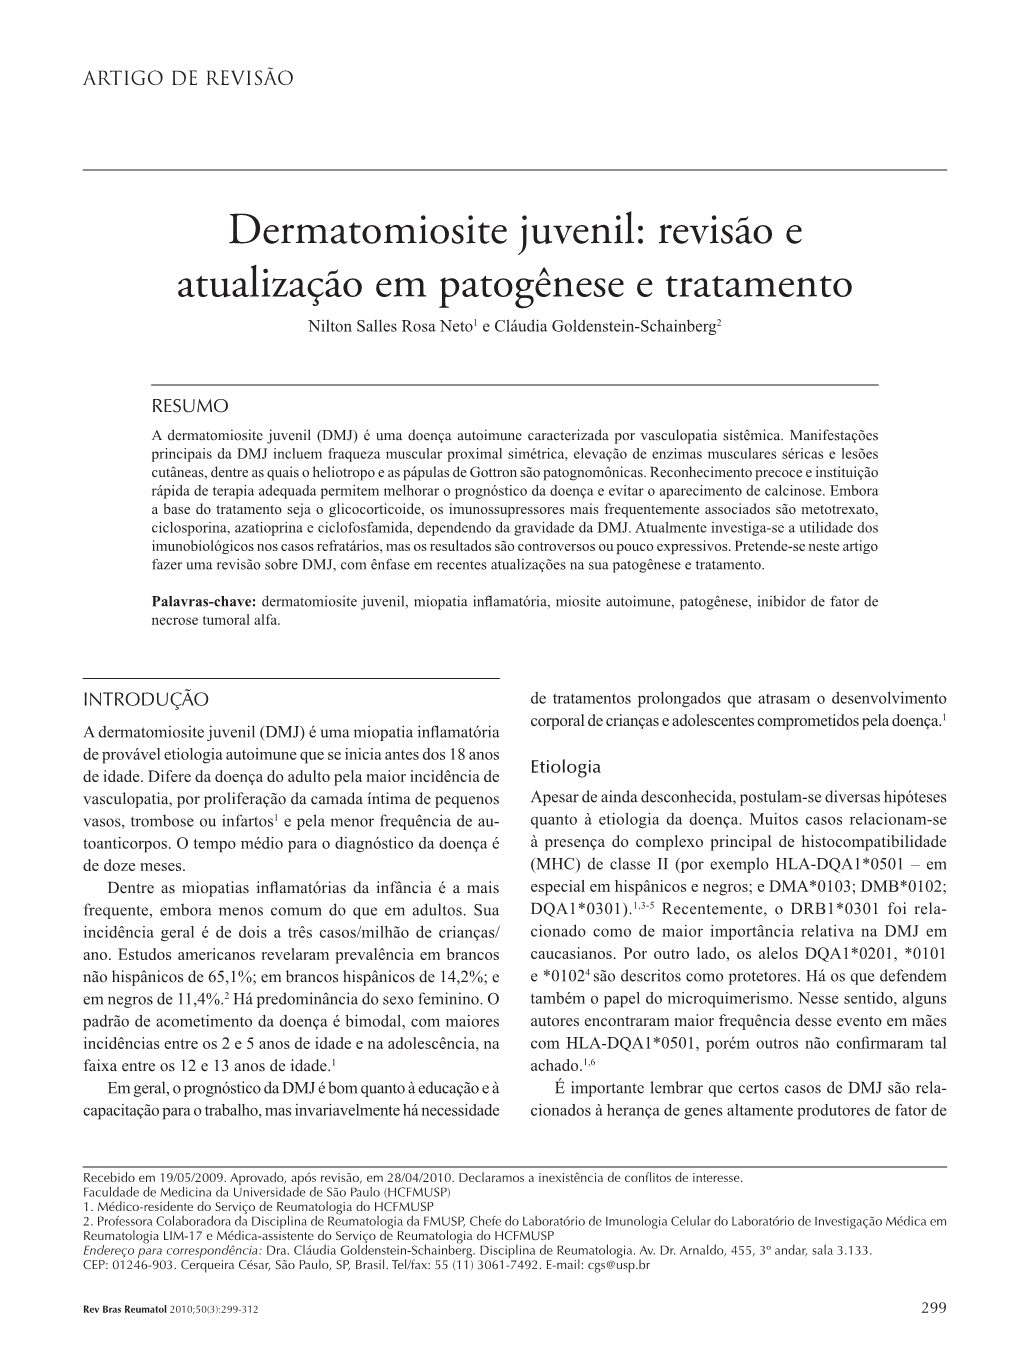 Juvenile Dermatomyositis: Review and Update of the Pathogenesis And